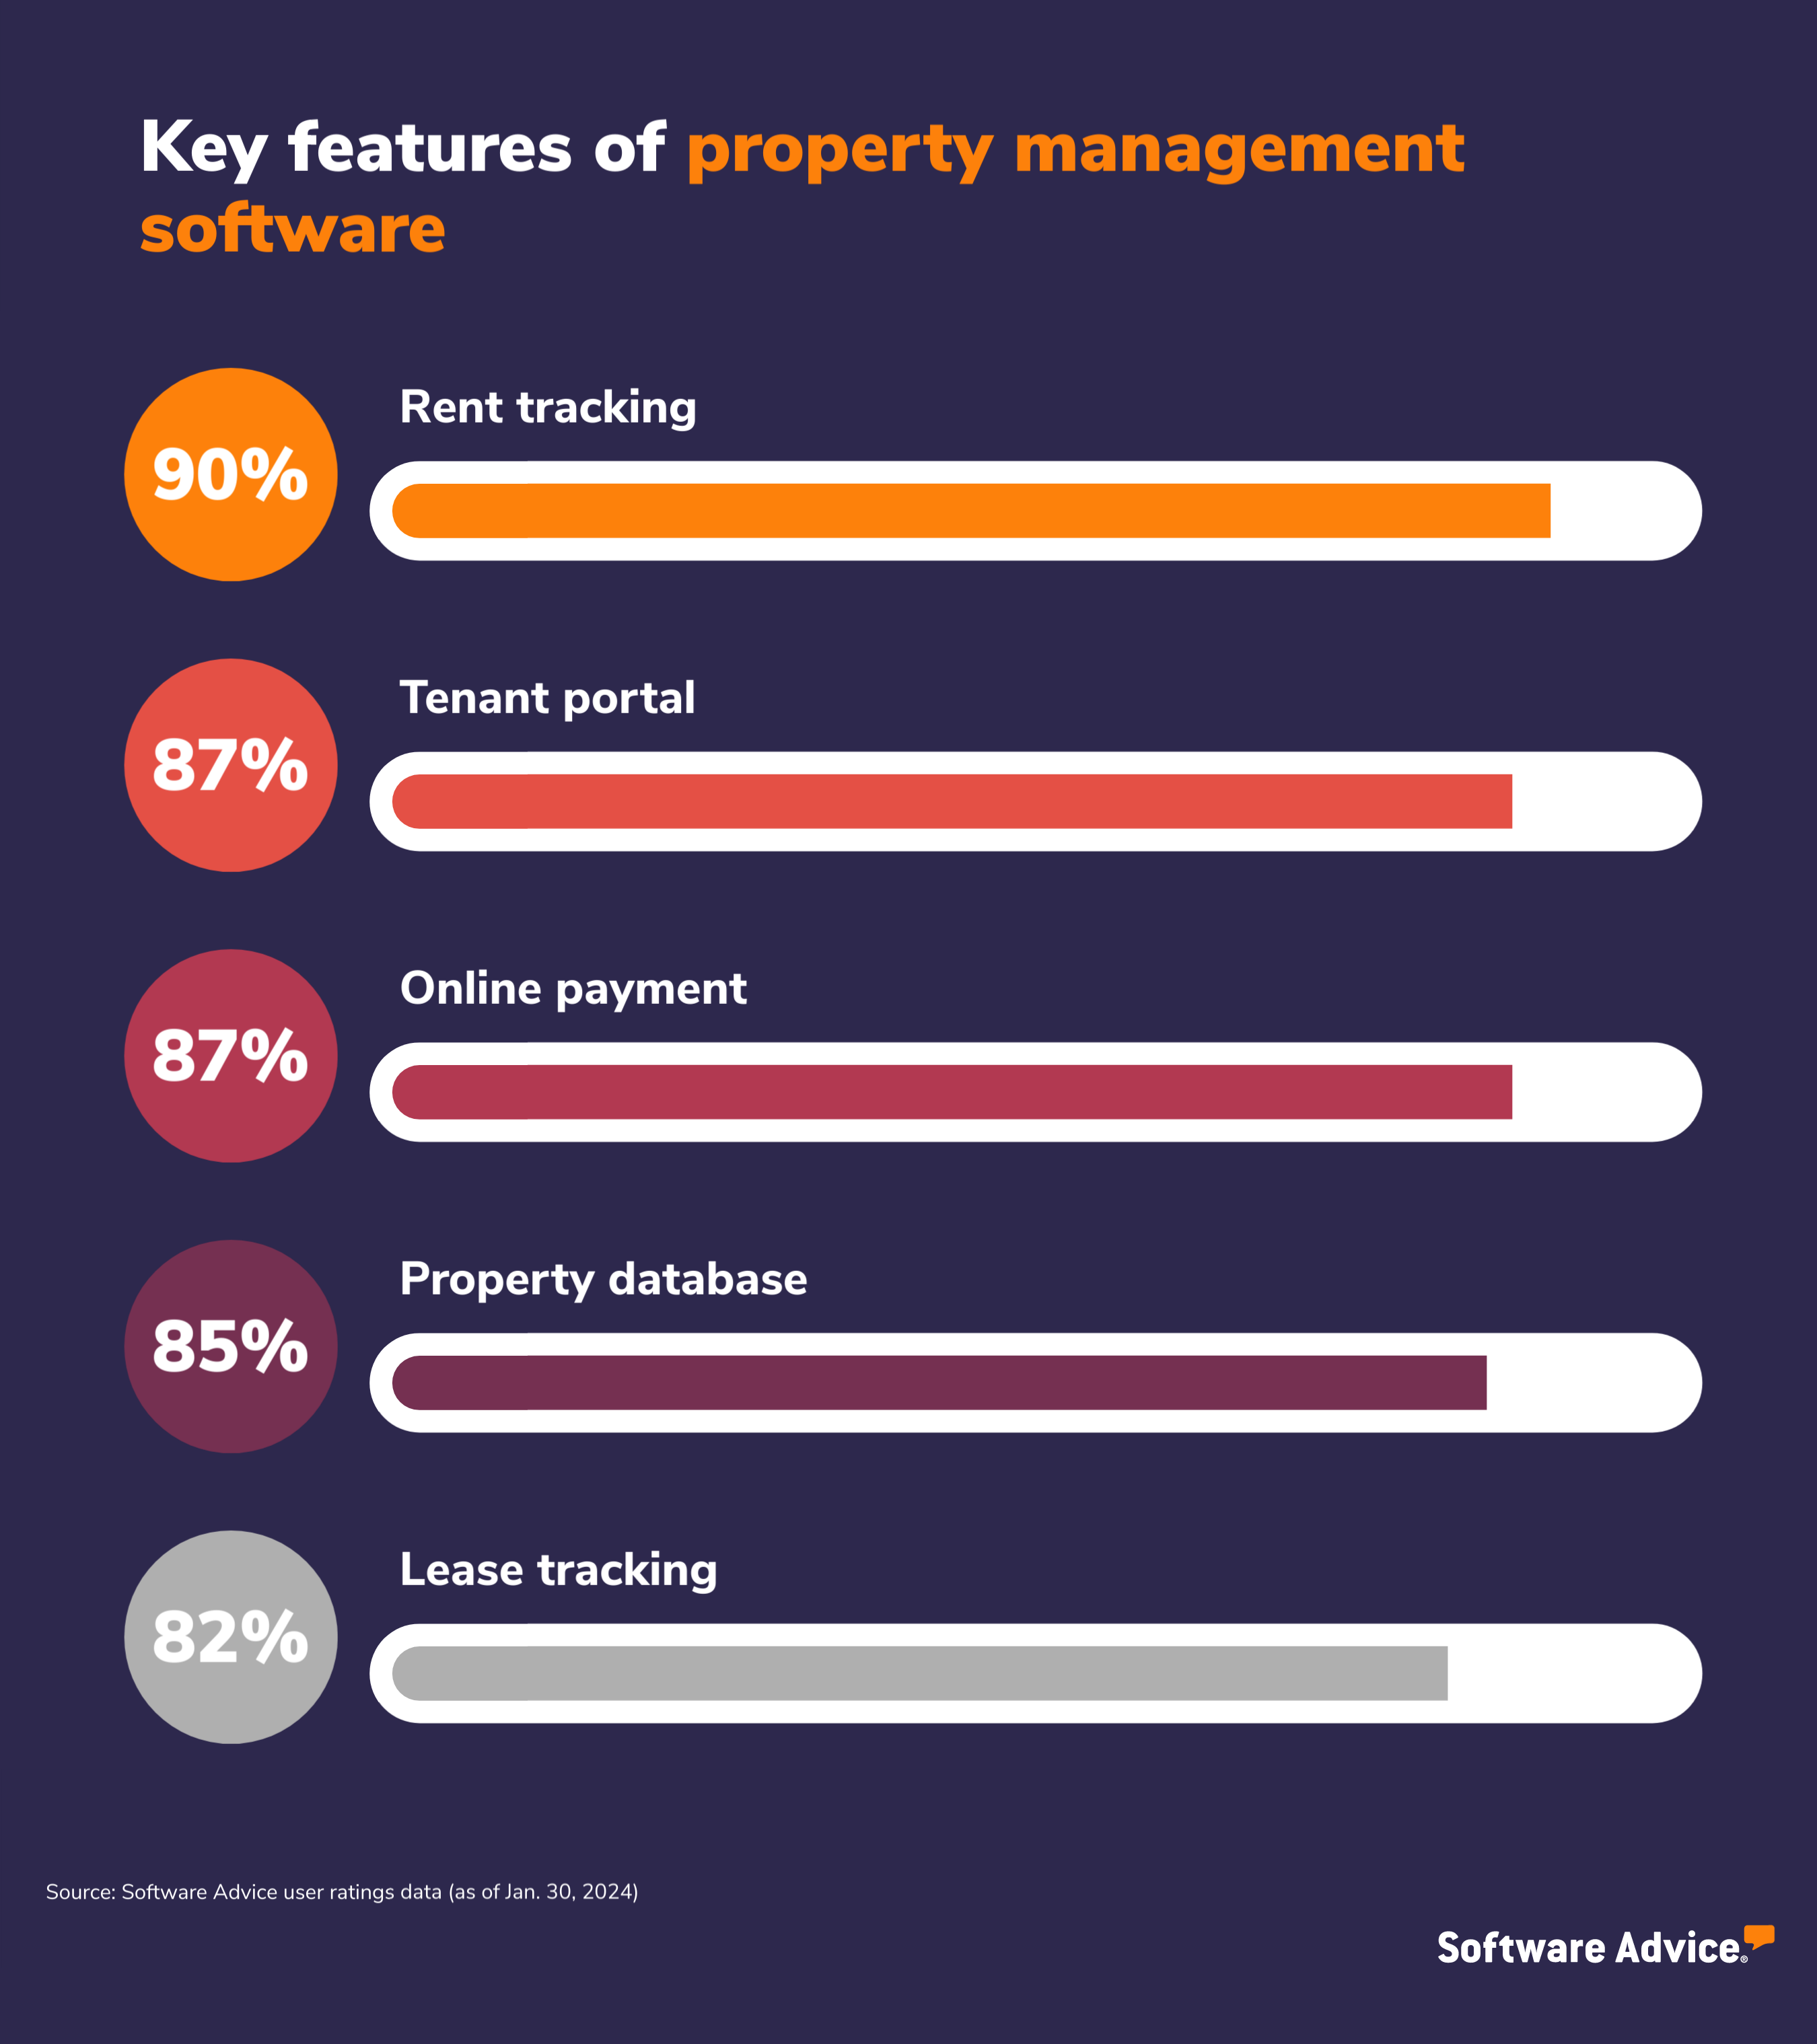 Key features of property management software